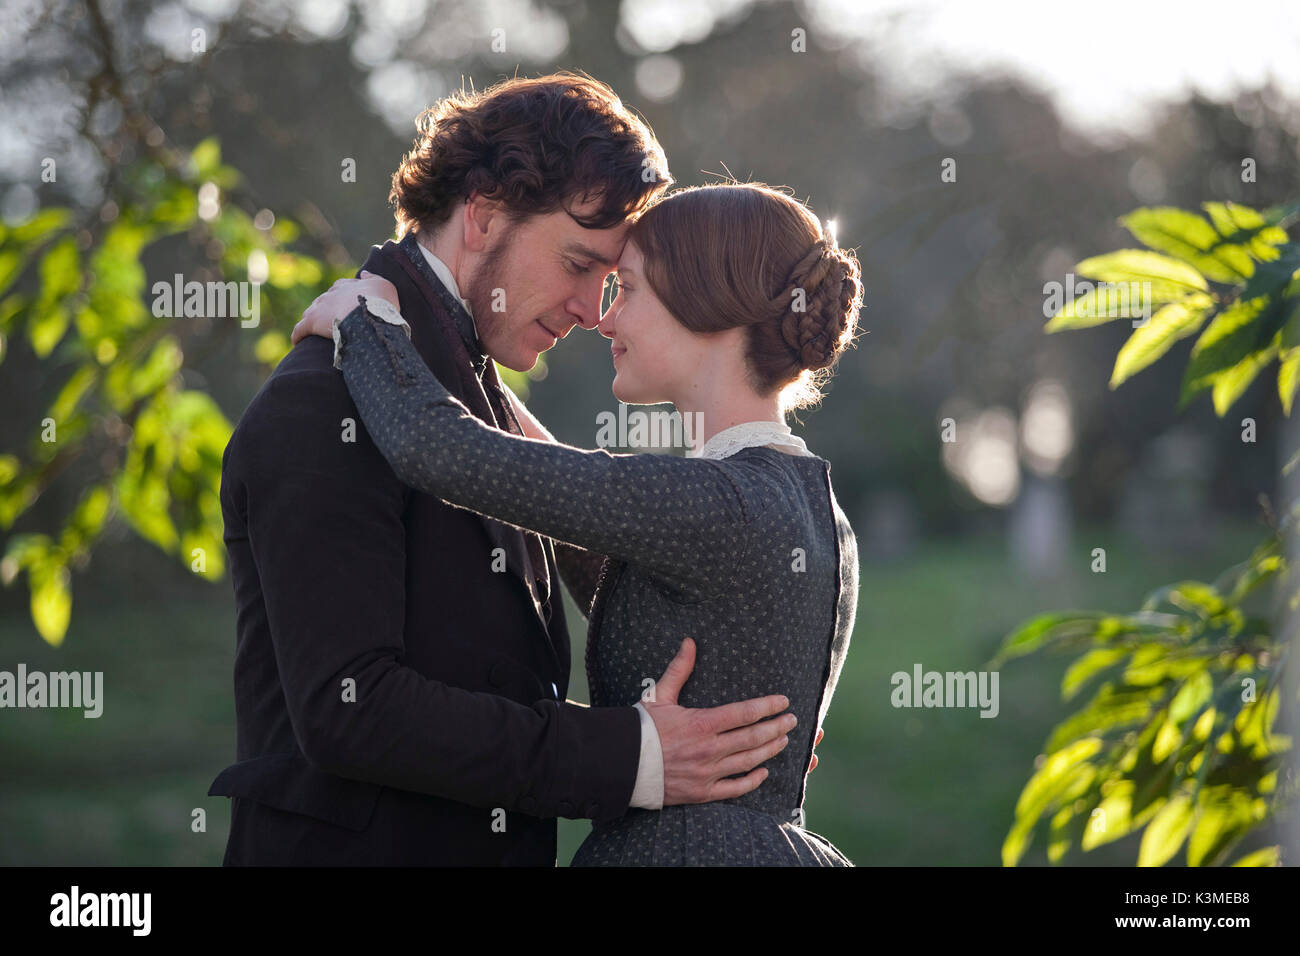 JANE EYRE [BR / US 2011] [L-R] MIA WASIKOWSKA as Jane Eyre, MICHAEL FASSBENDER as Mr Rochester     Date: 2011 Stock Photo